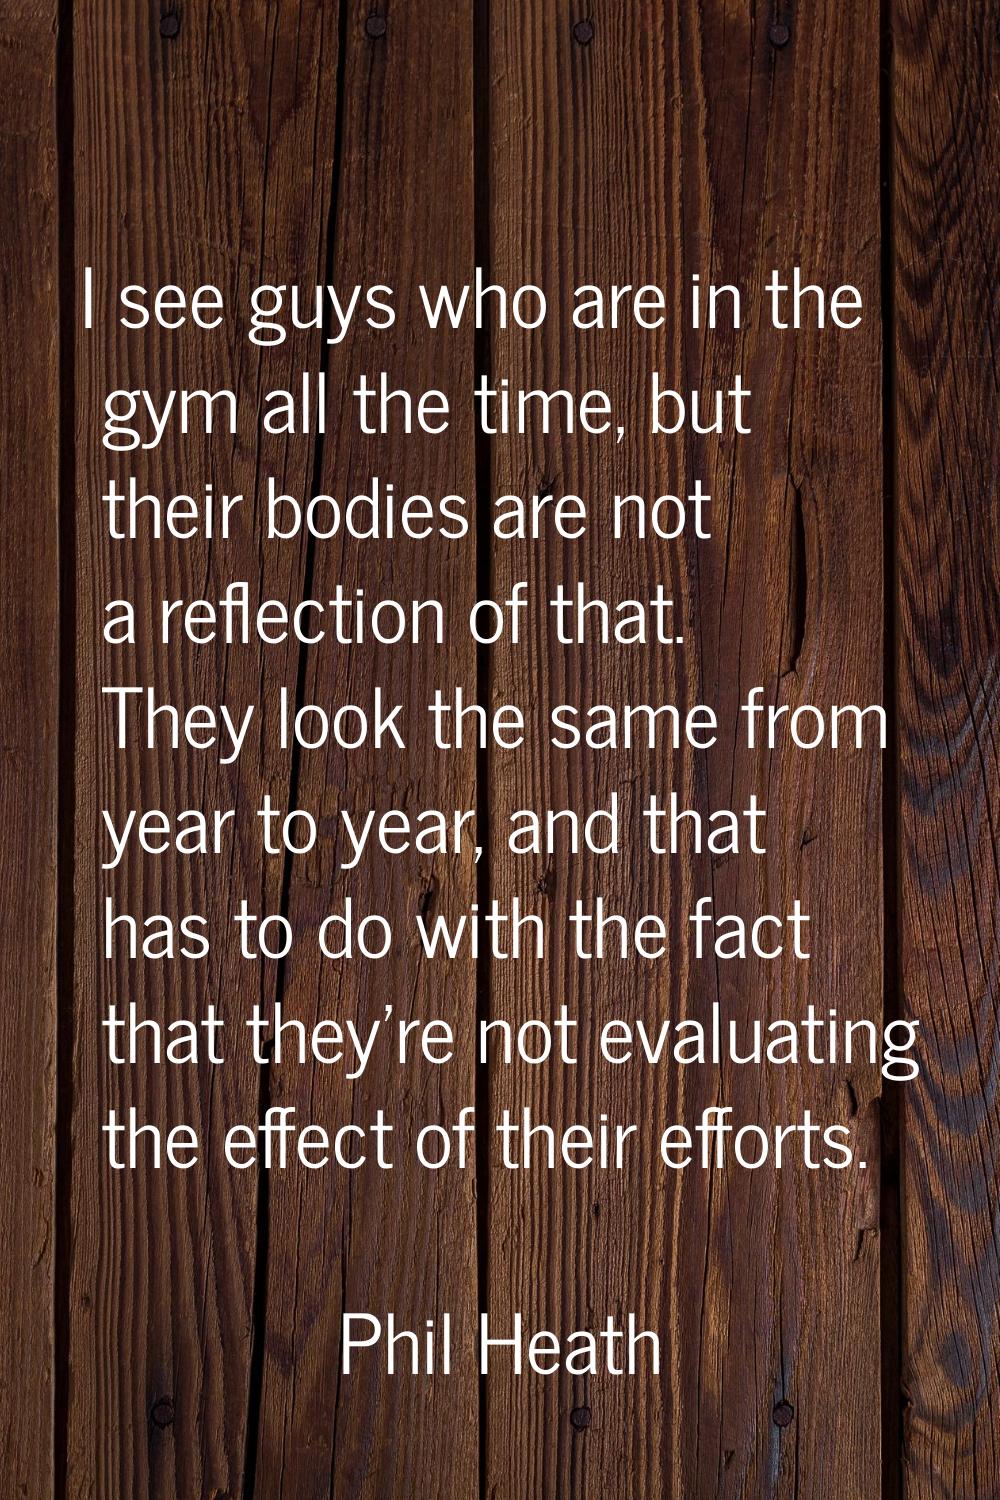 I see guys who are in the gym all the time, but their bodies are not a reflection of that. They loo